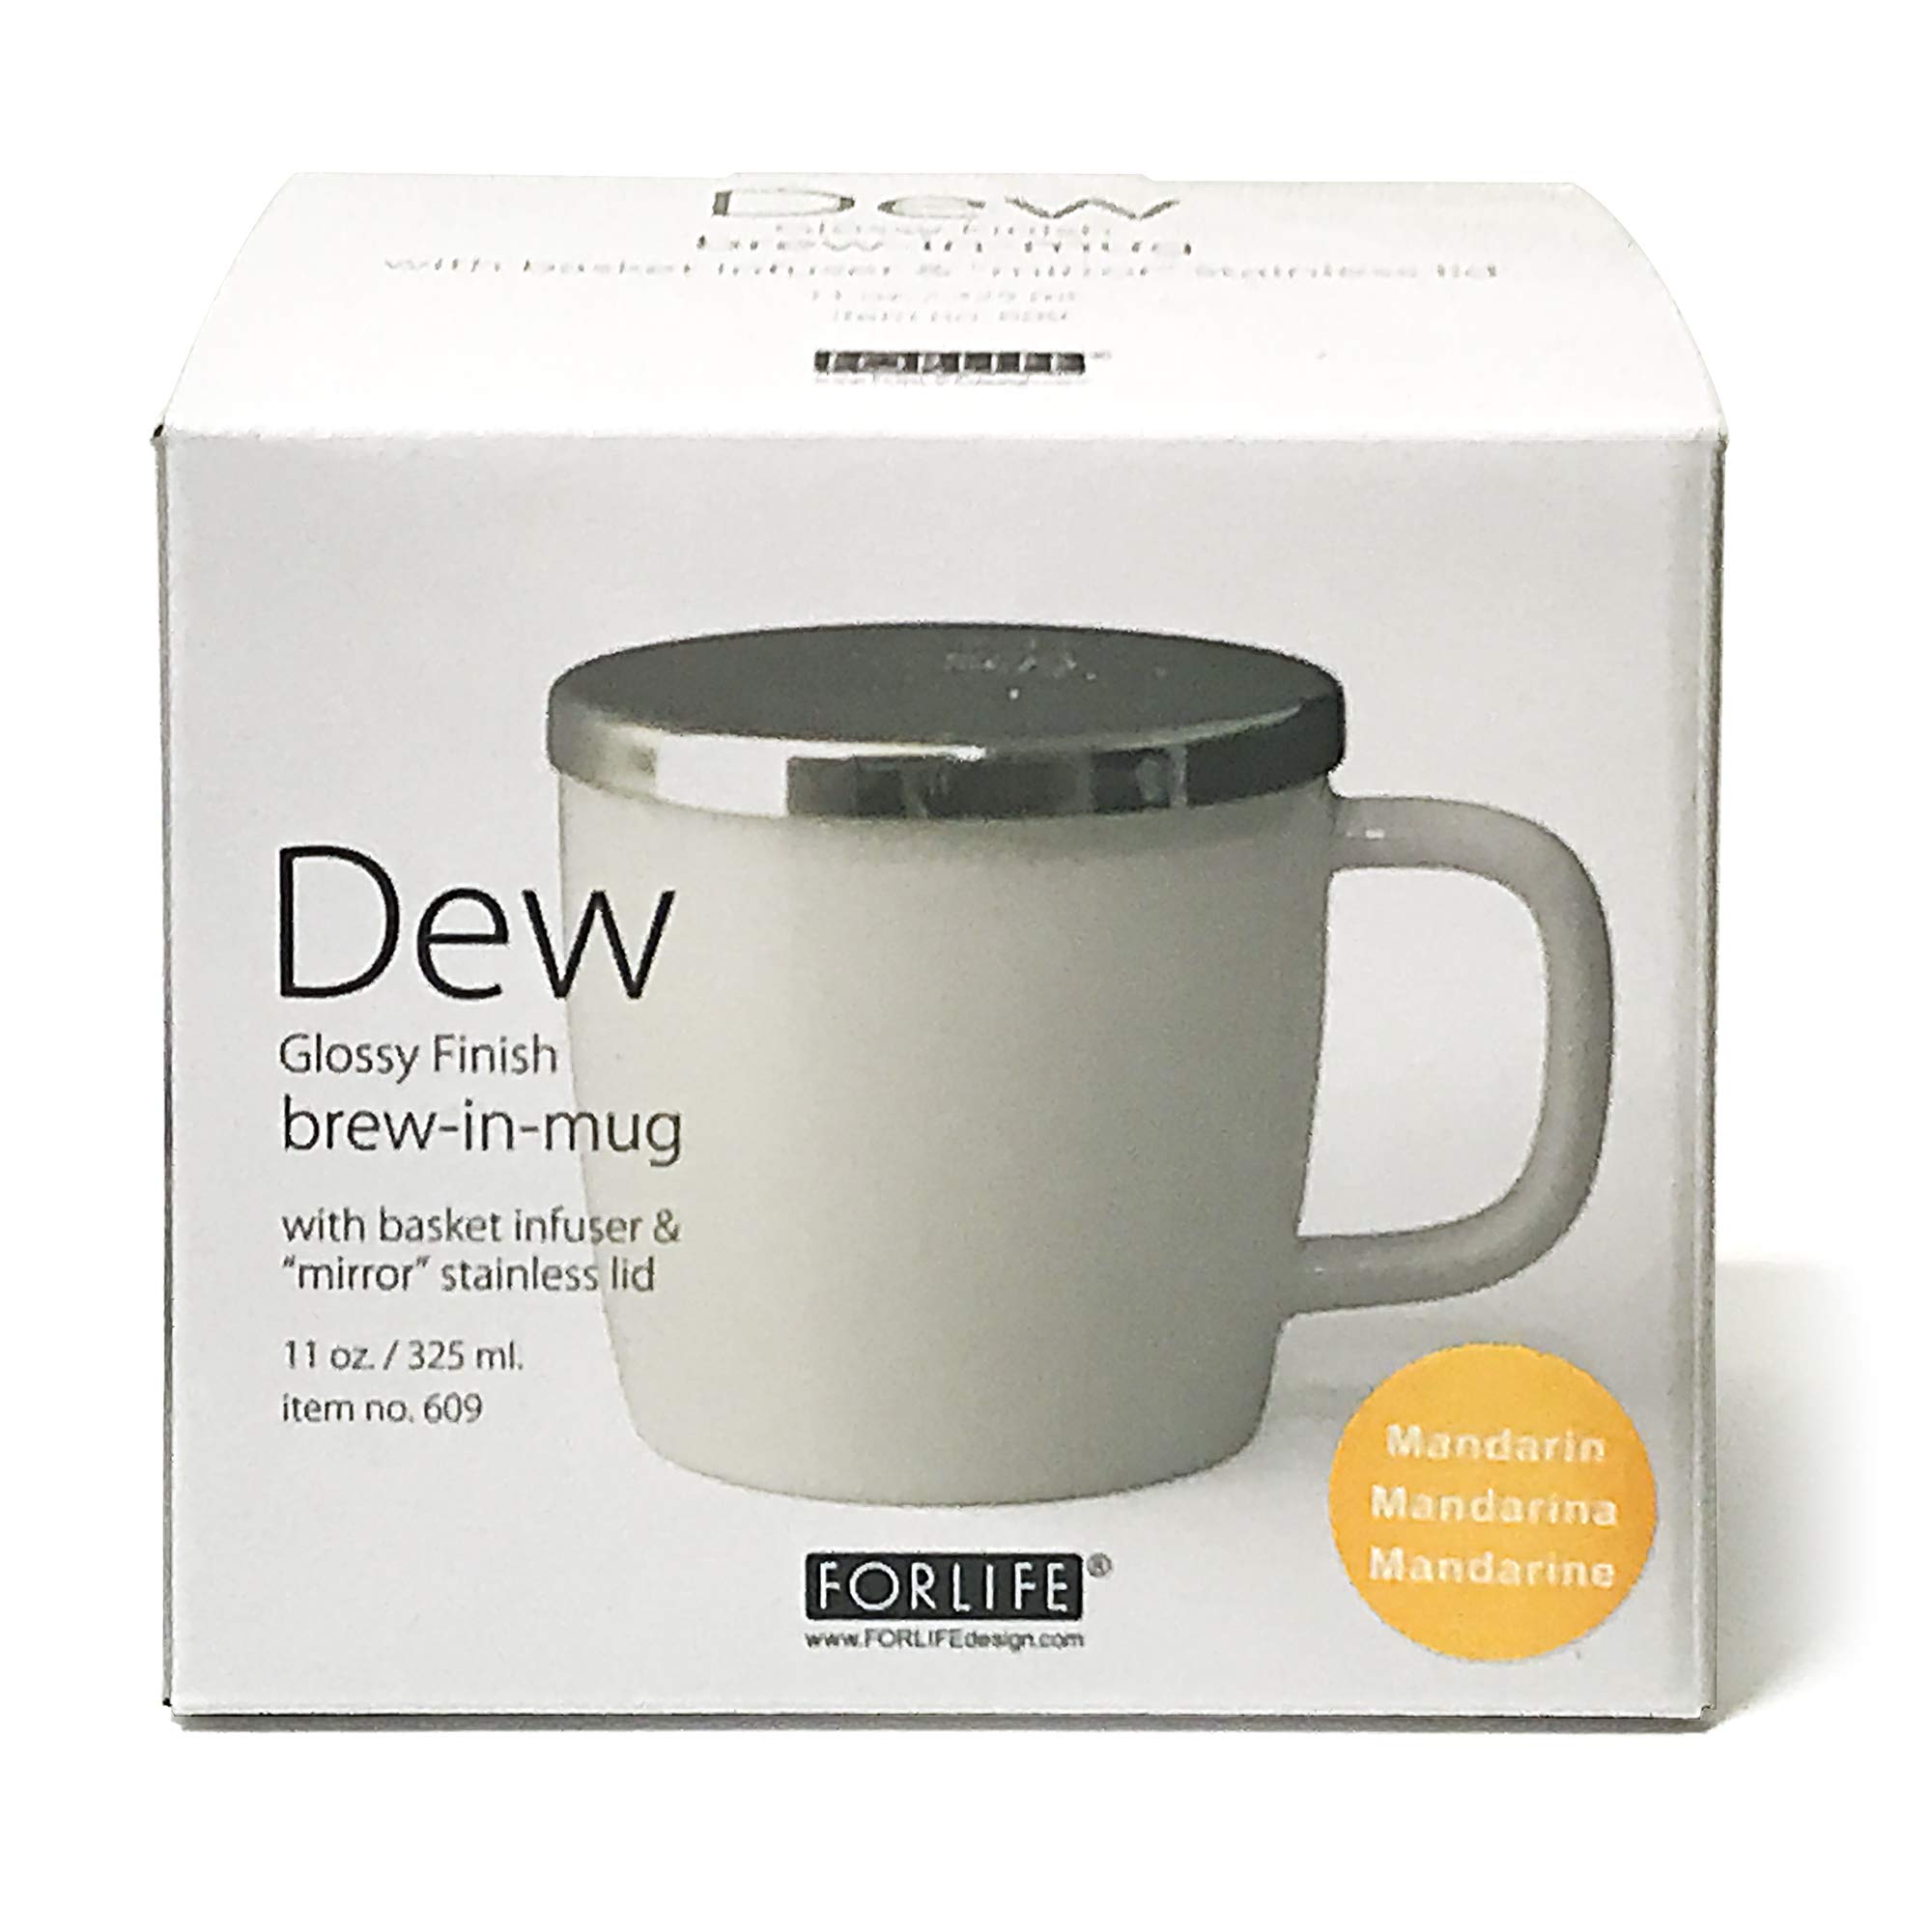 FORLIFE Dew Glossy Finish Brew-In-Mug with Basket Infuser &"Mirror" Stainless Lid 11 oz. (Mandarin)